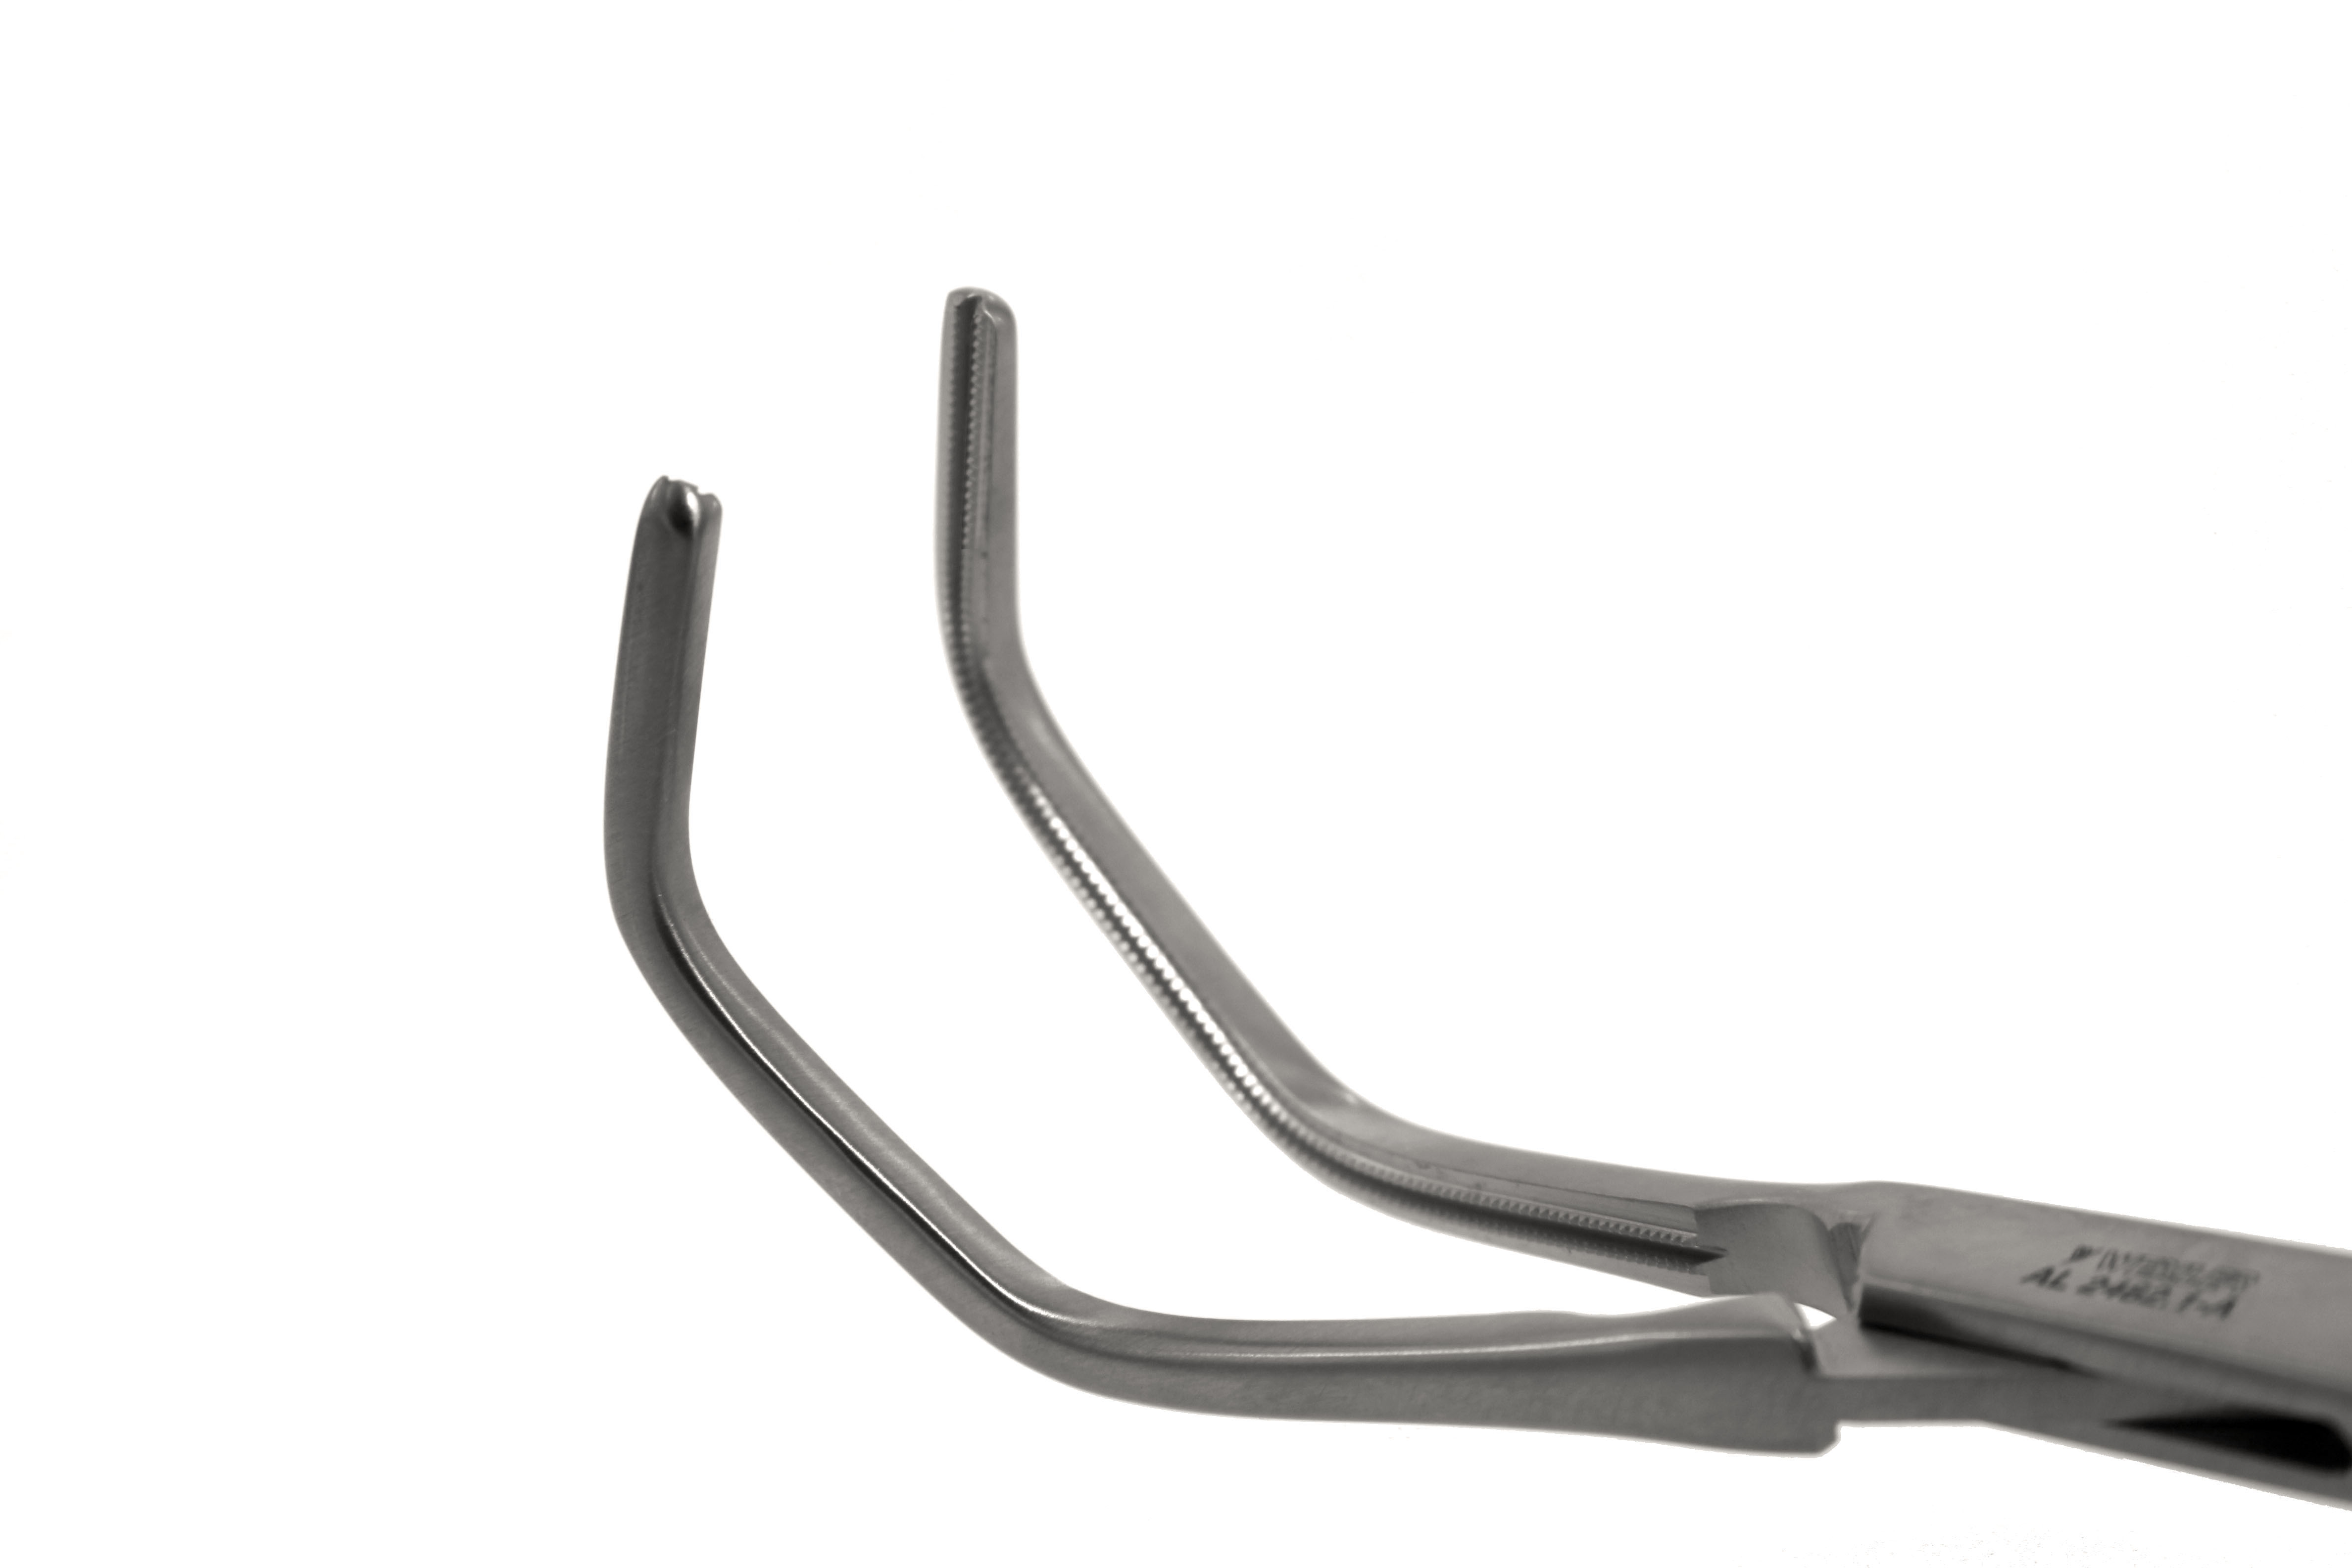 Tangential Occlusion Clamp - 48mm DeBakey Atraumatic jaws